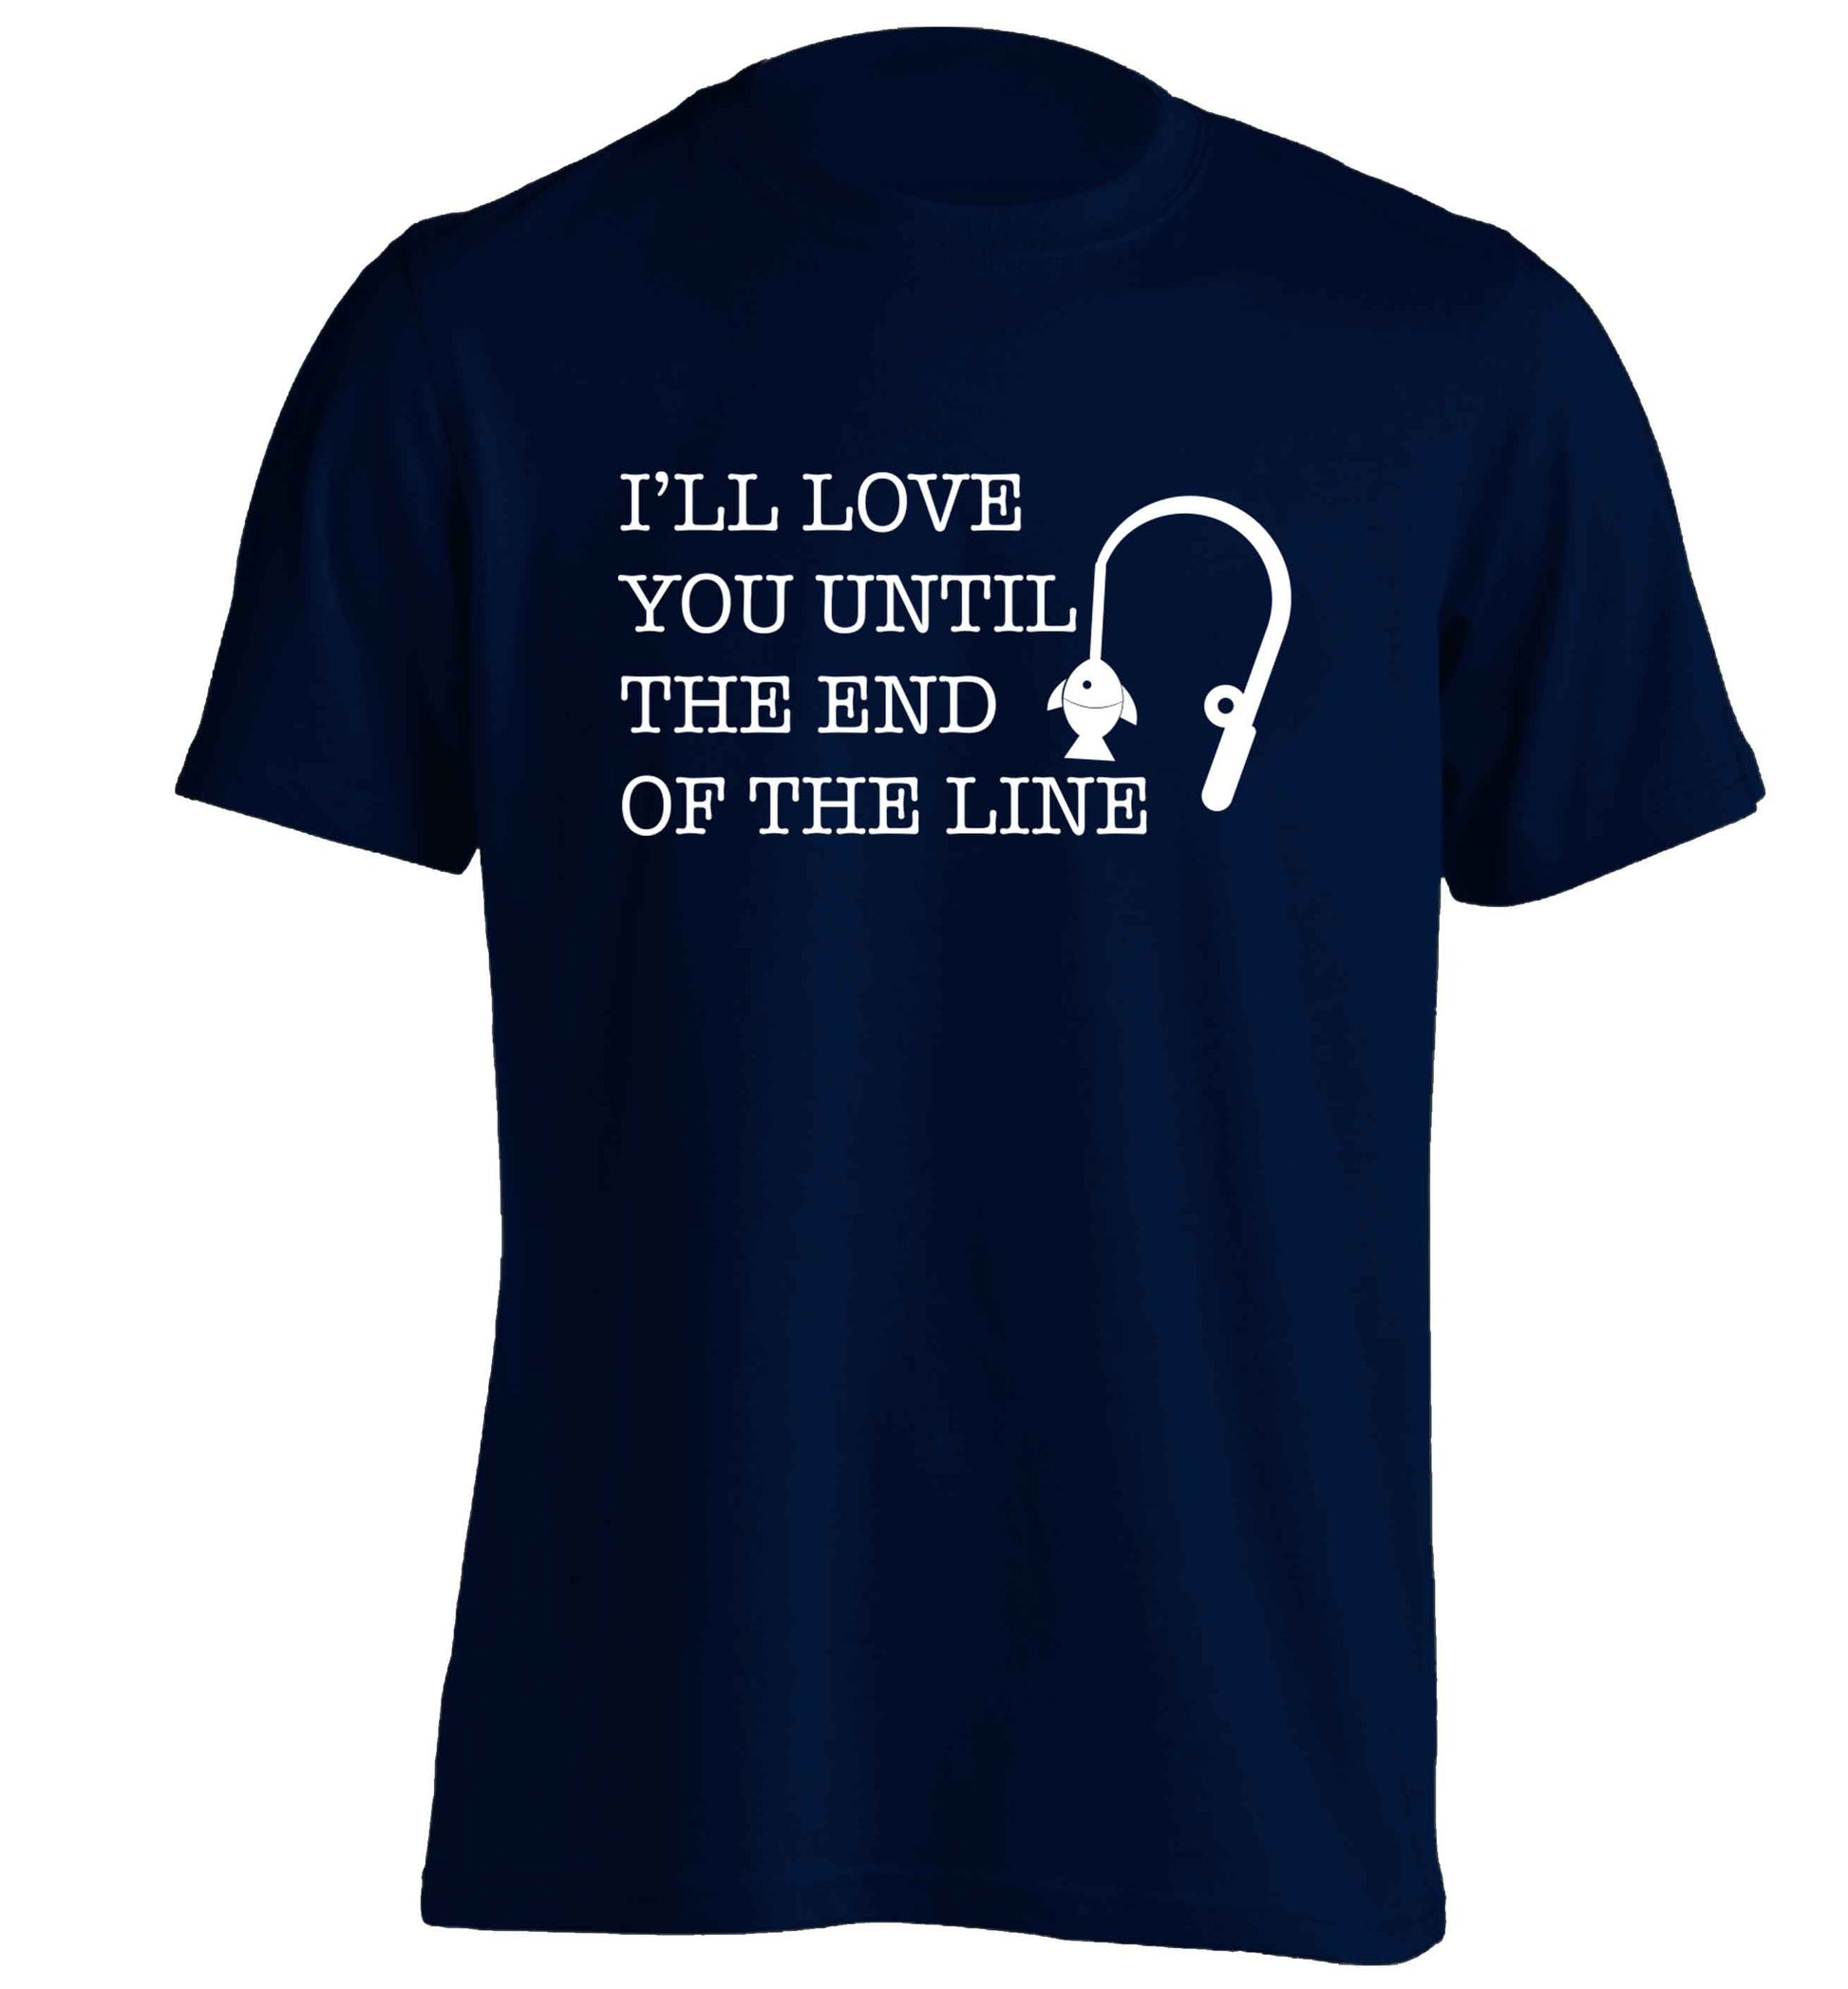 I'll love you until the end of the line adults unisex navy Tshirt 2XL